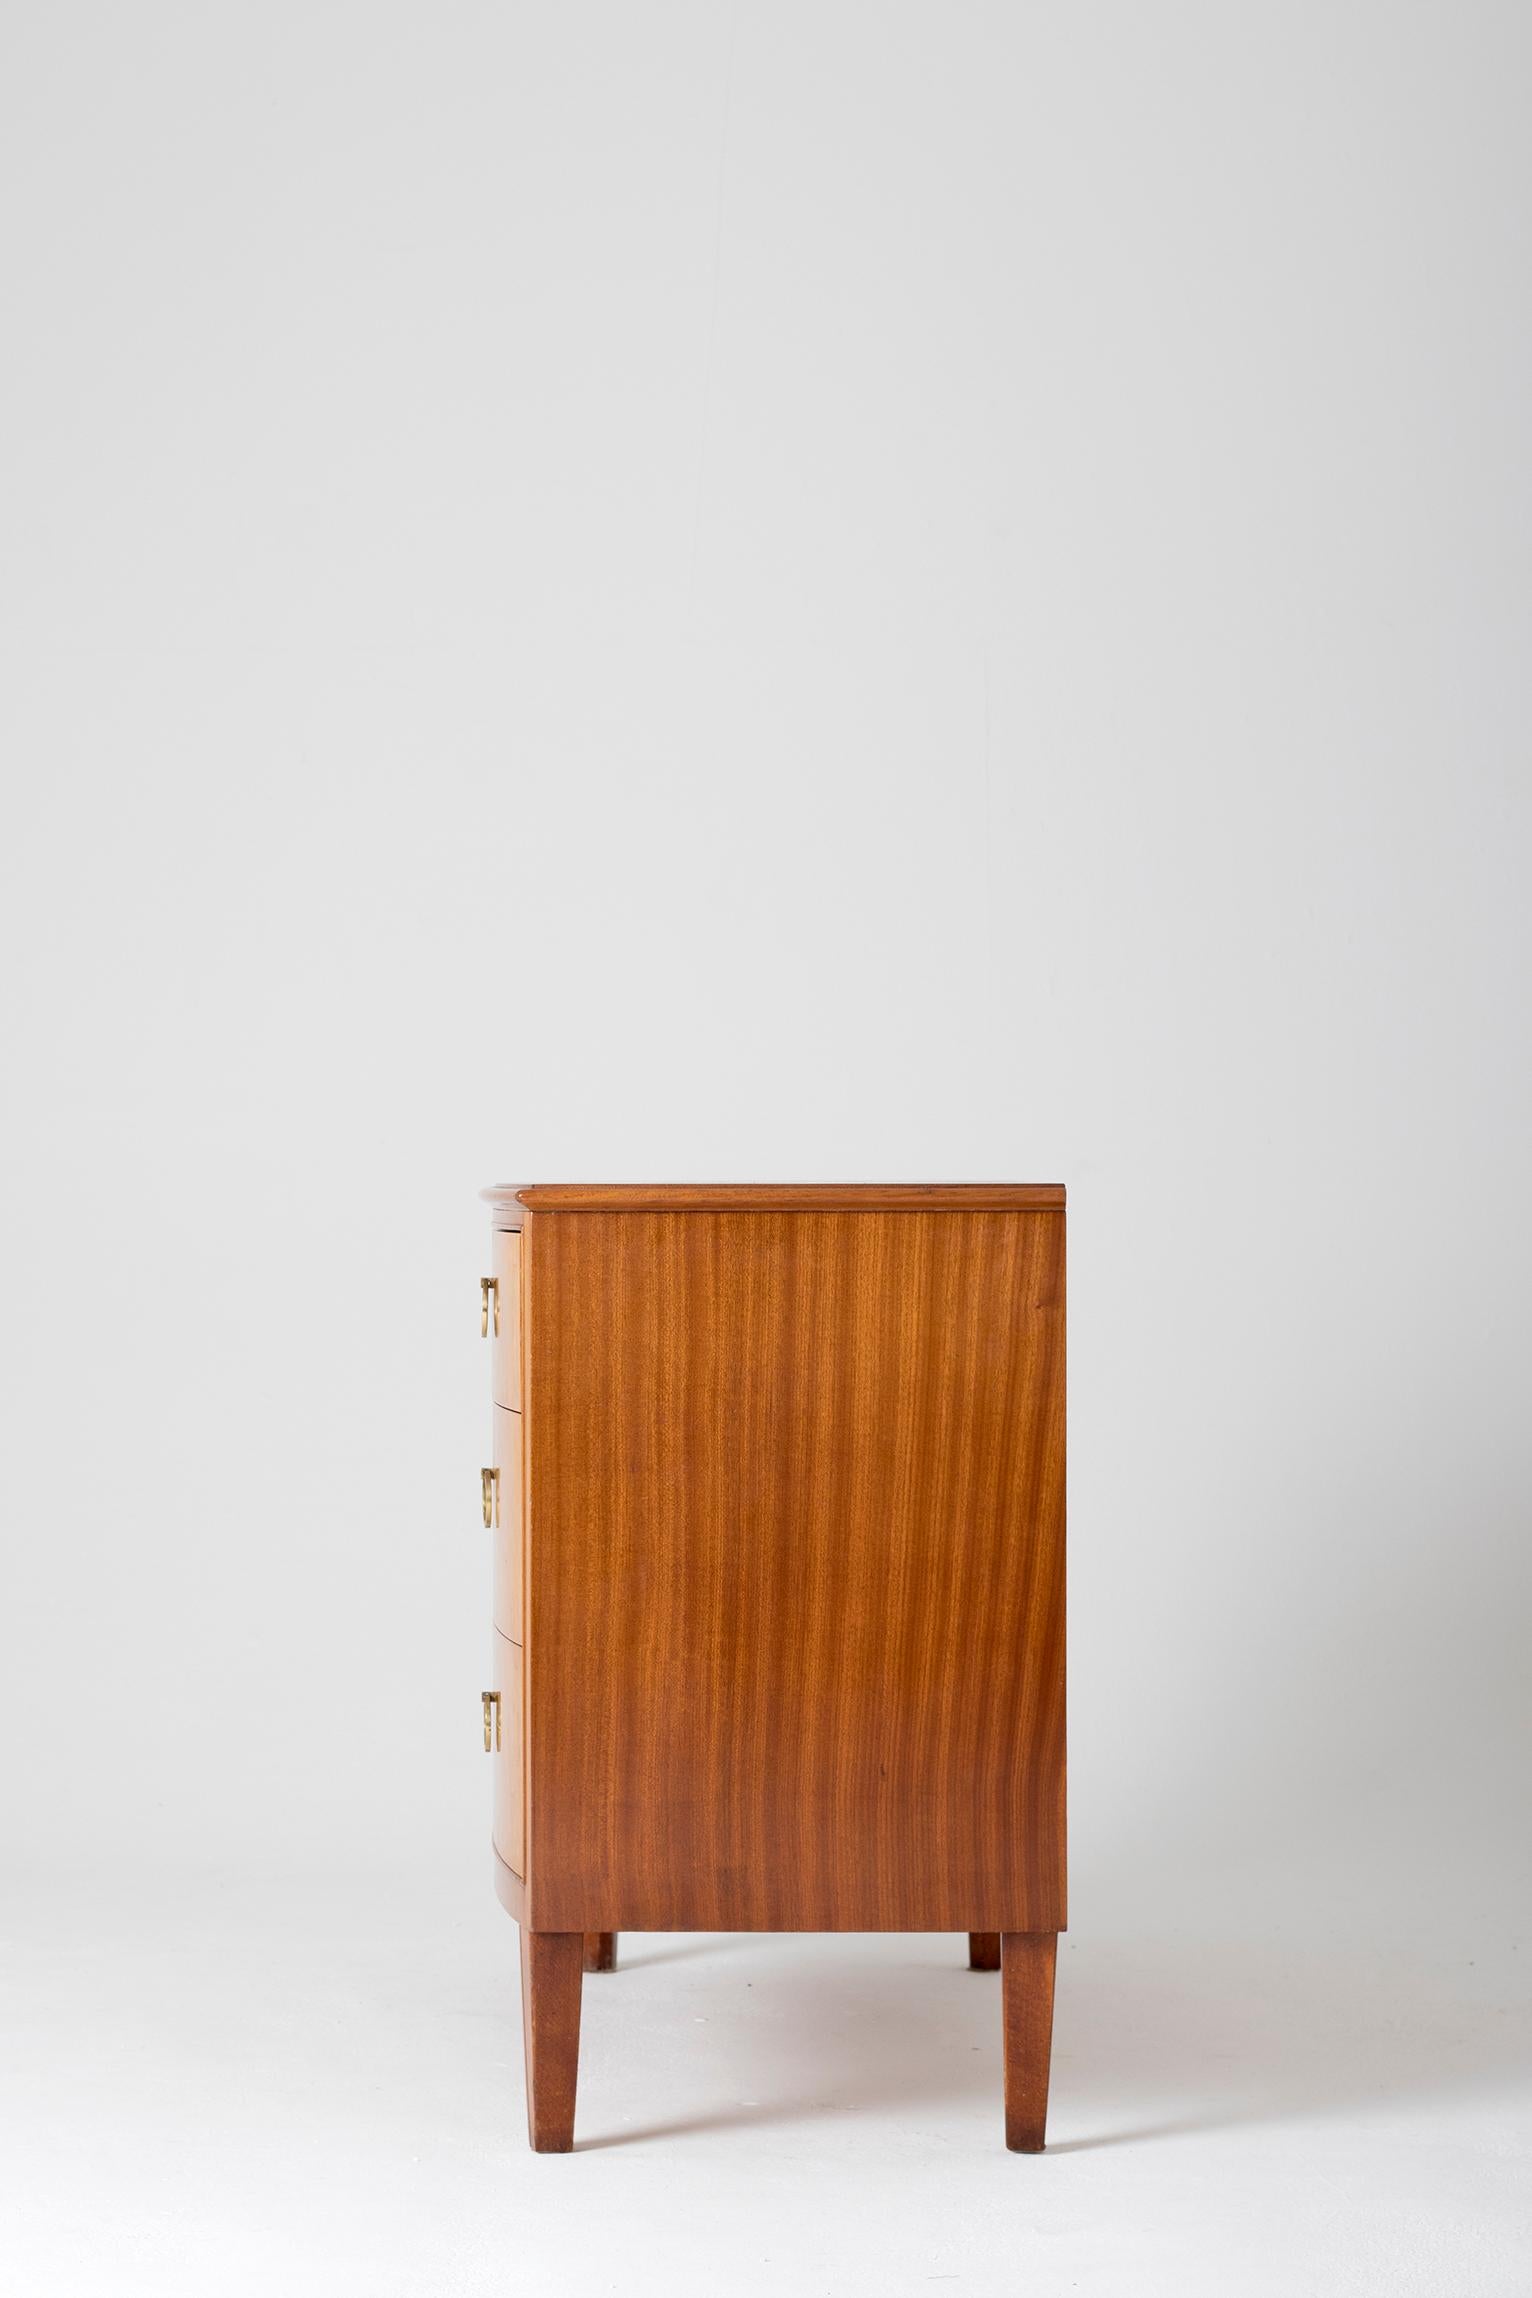 Mahogany Chest of Drawers by J. O. Carlssons 2